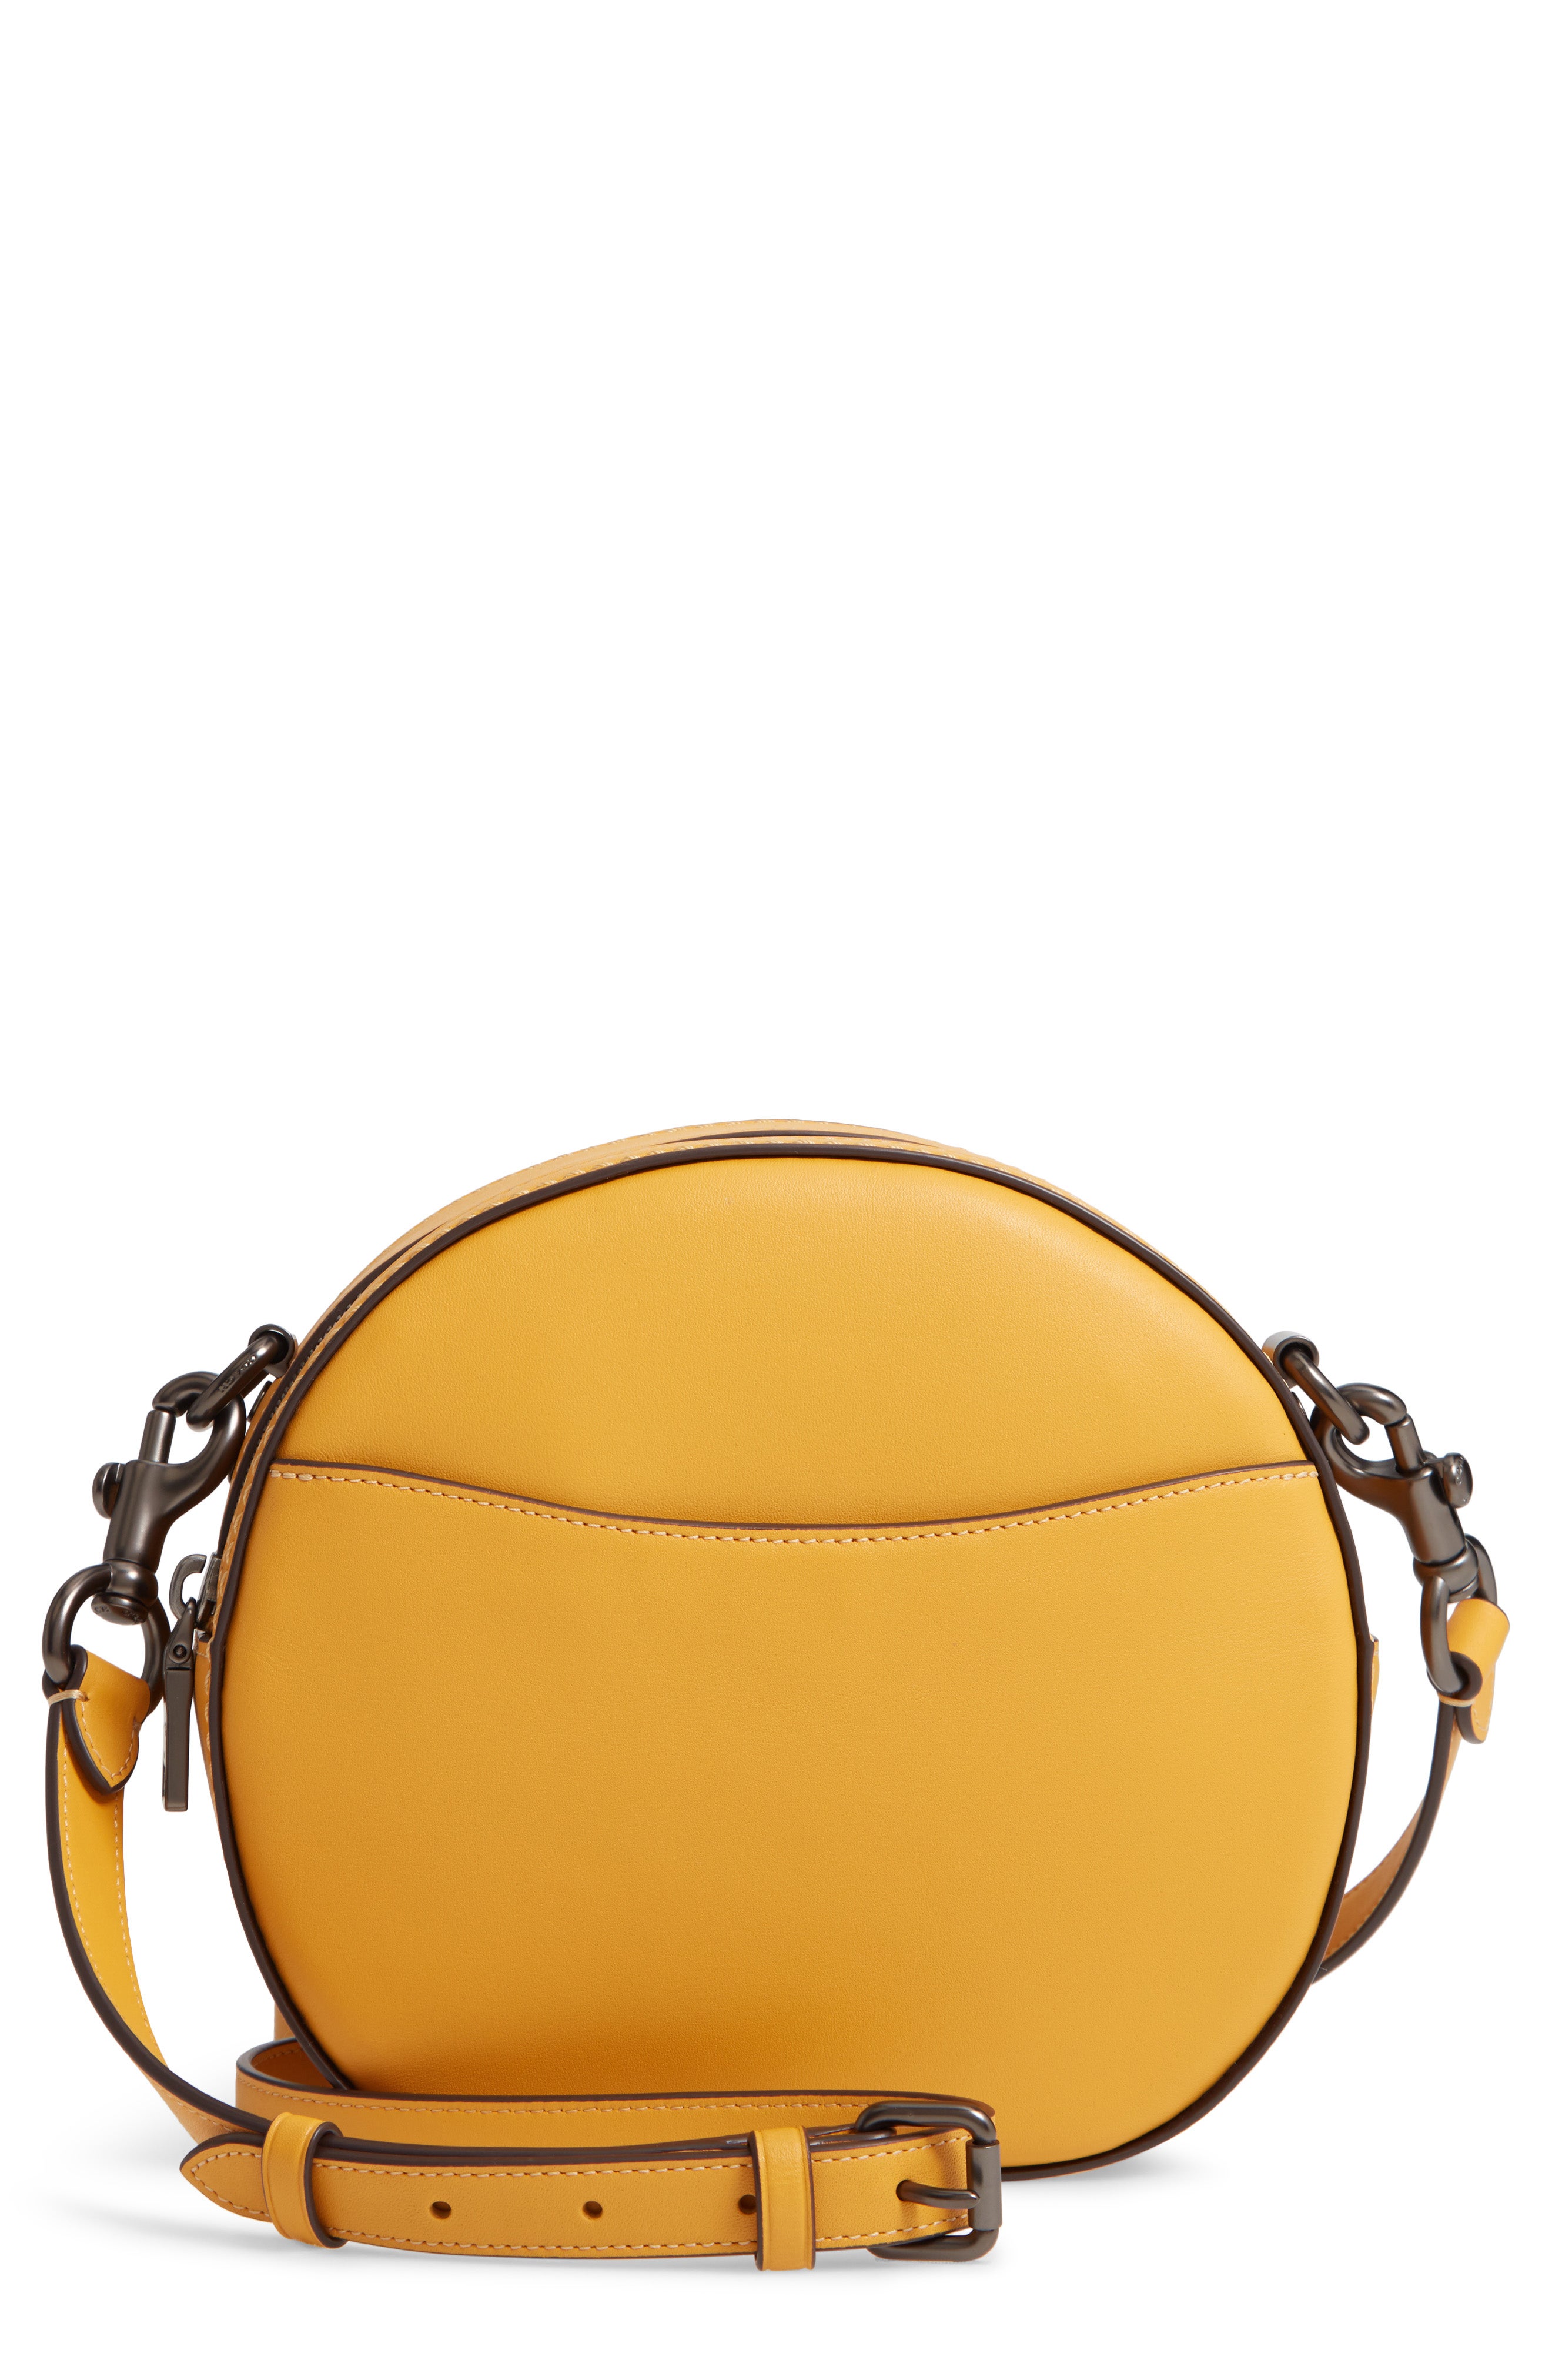 Let's Chat About The Coach Canteen Crossbody Handbag! - Fashion